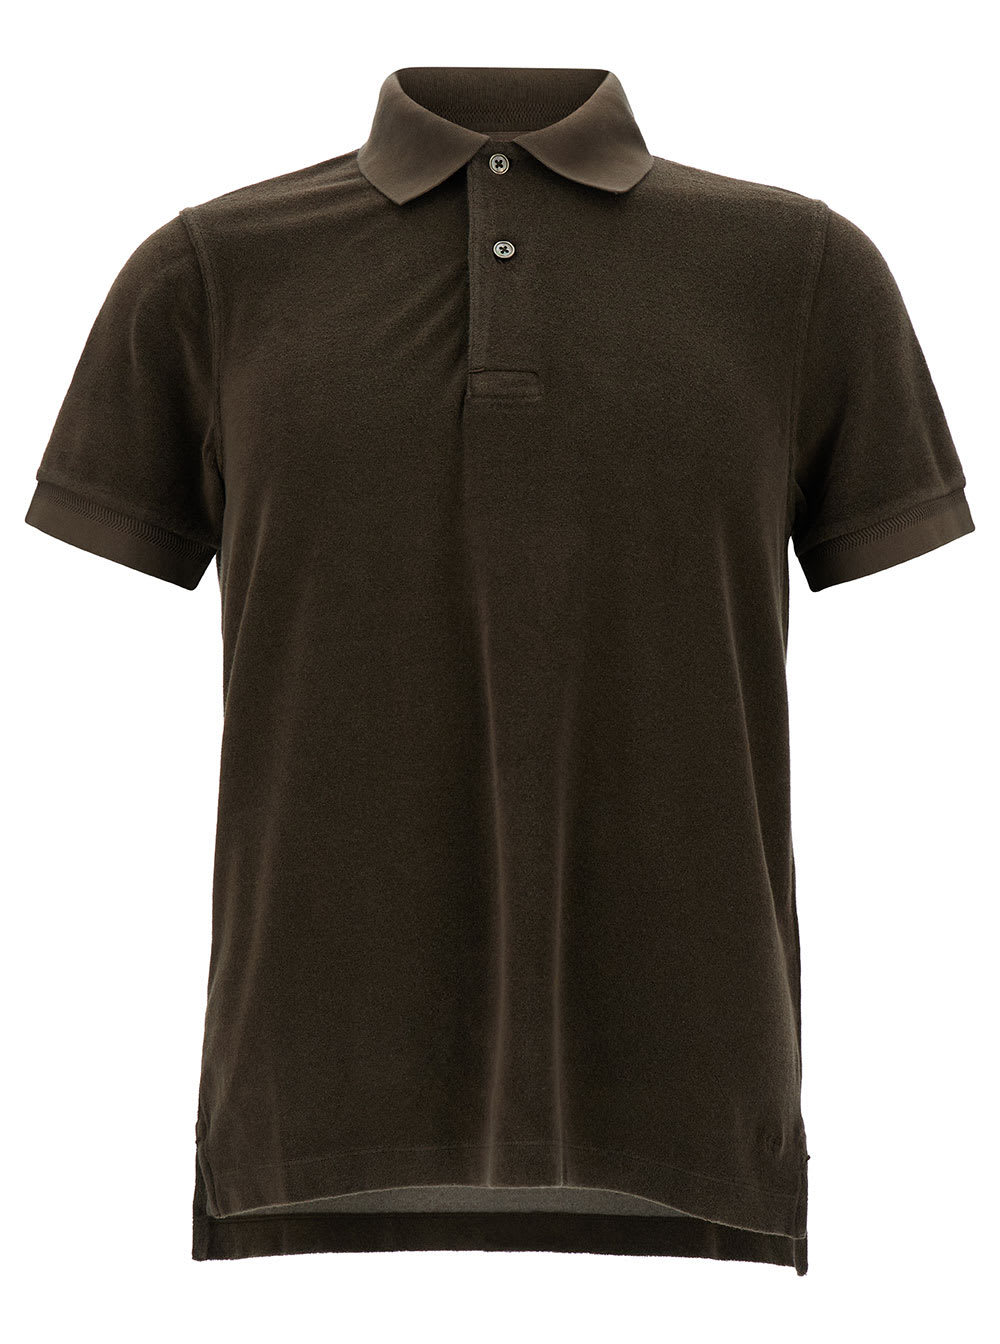 TOM FORD BROWN POLO SHIRT WITH TONAL LOGO EMBROIDERY IN COTTON BLEND MAN